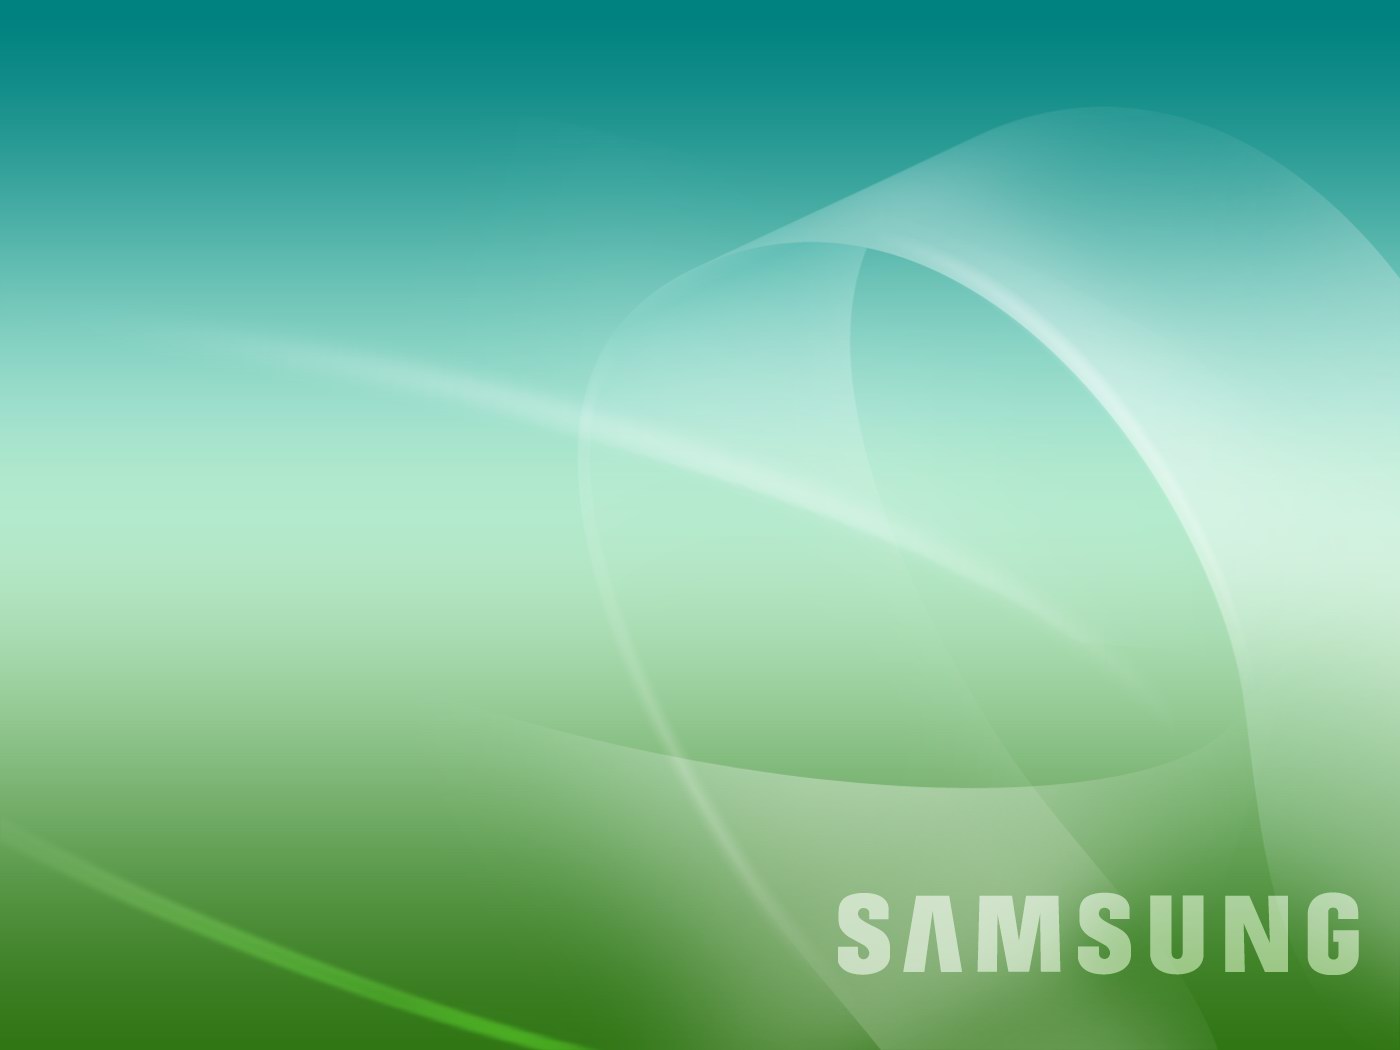 Samsung Wallpapers Free Download